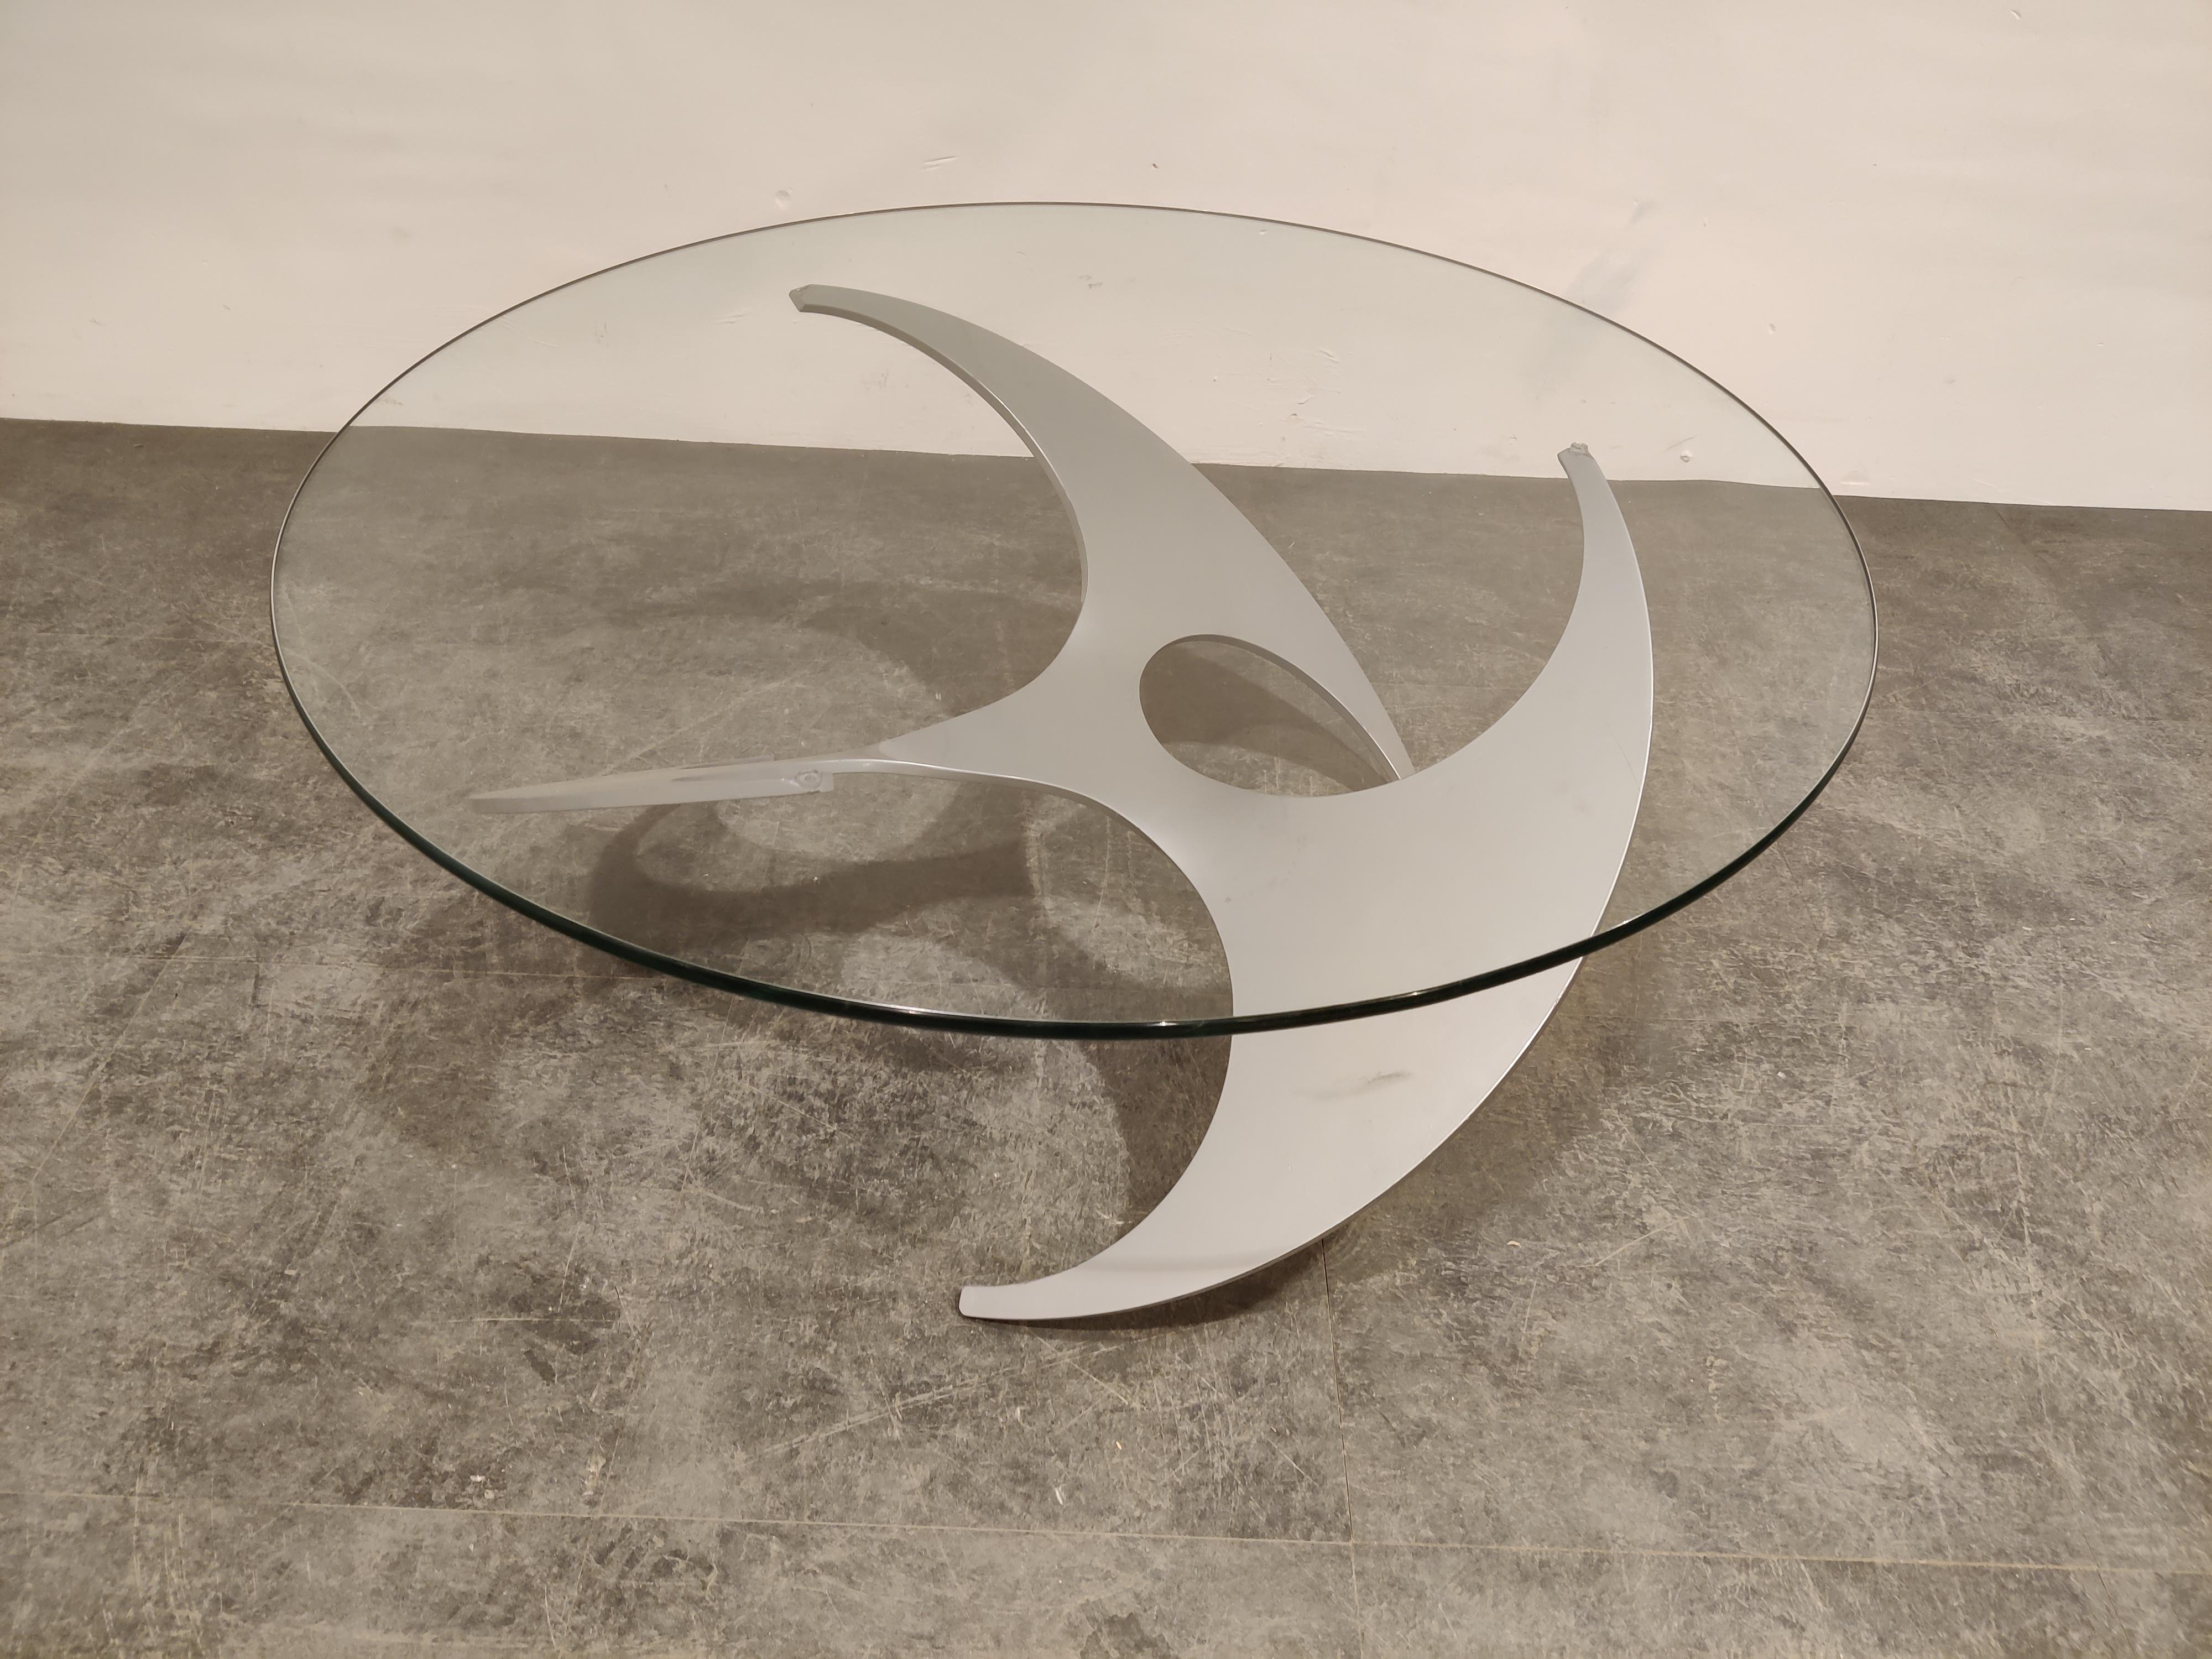 Mid century 'propellor' coffee table by Knut Hesterberg for Ronald Schmitt.

The table has a clear round glass top with a sculptural aluminium base.

The table is in good original condition.

1960s, Germany

Measures: Height